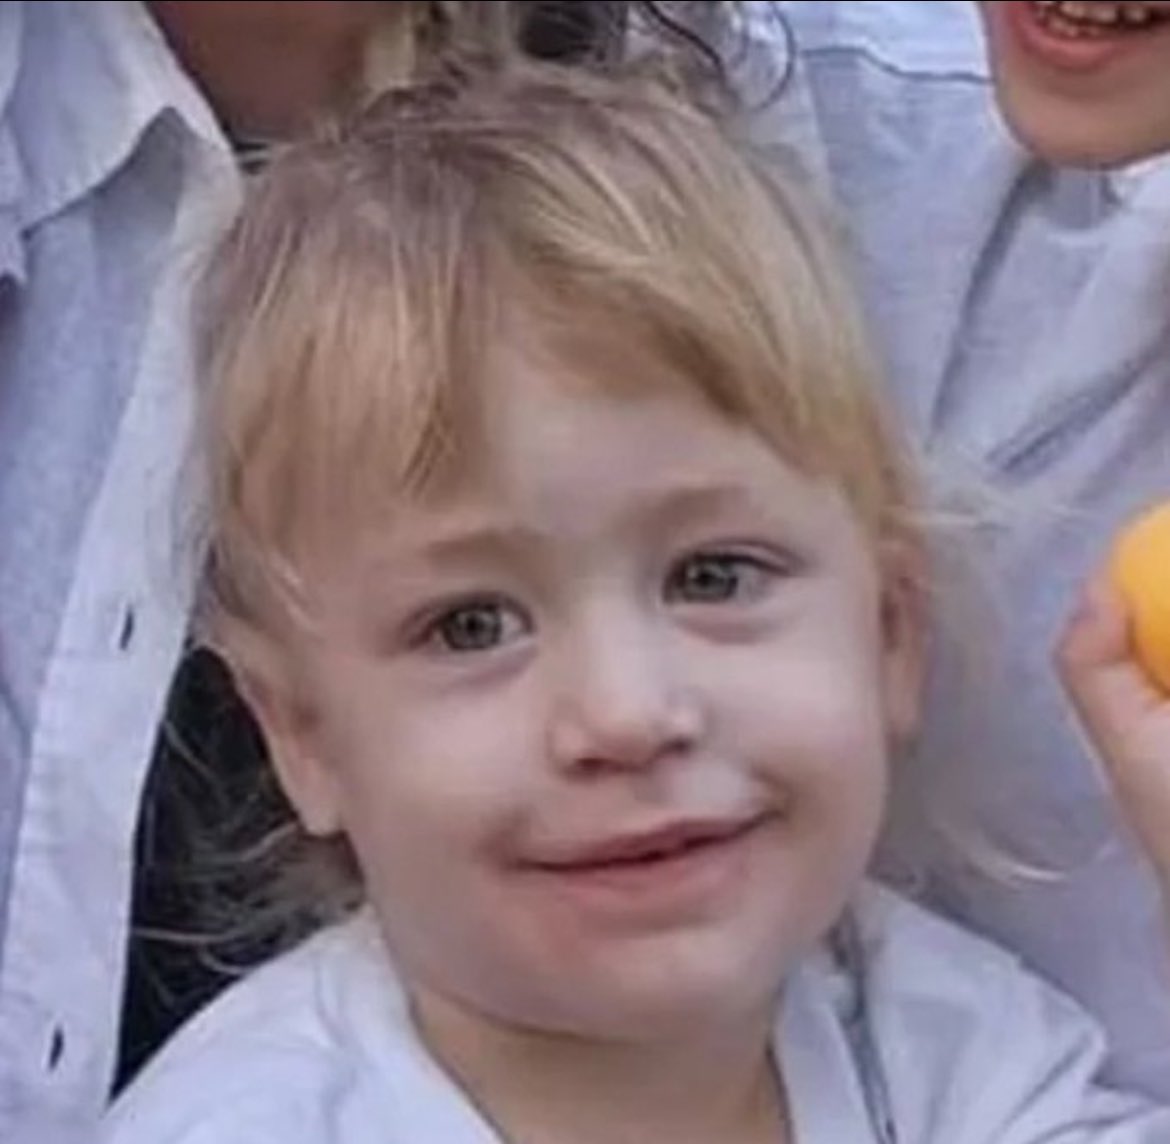 Omer Siman-Tov, a 4-year-old innocent boy, was burned alive with his entire family on October 7th. Fuck your ceasefire. Hamas are the Nazis of our days, they don’t have the right to exist.